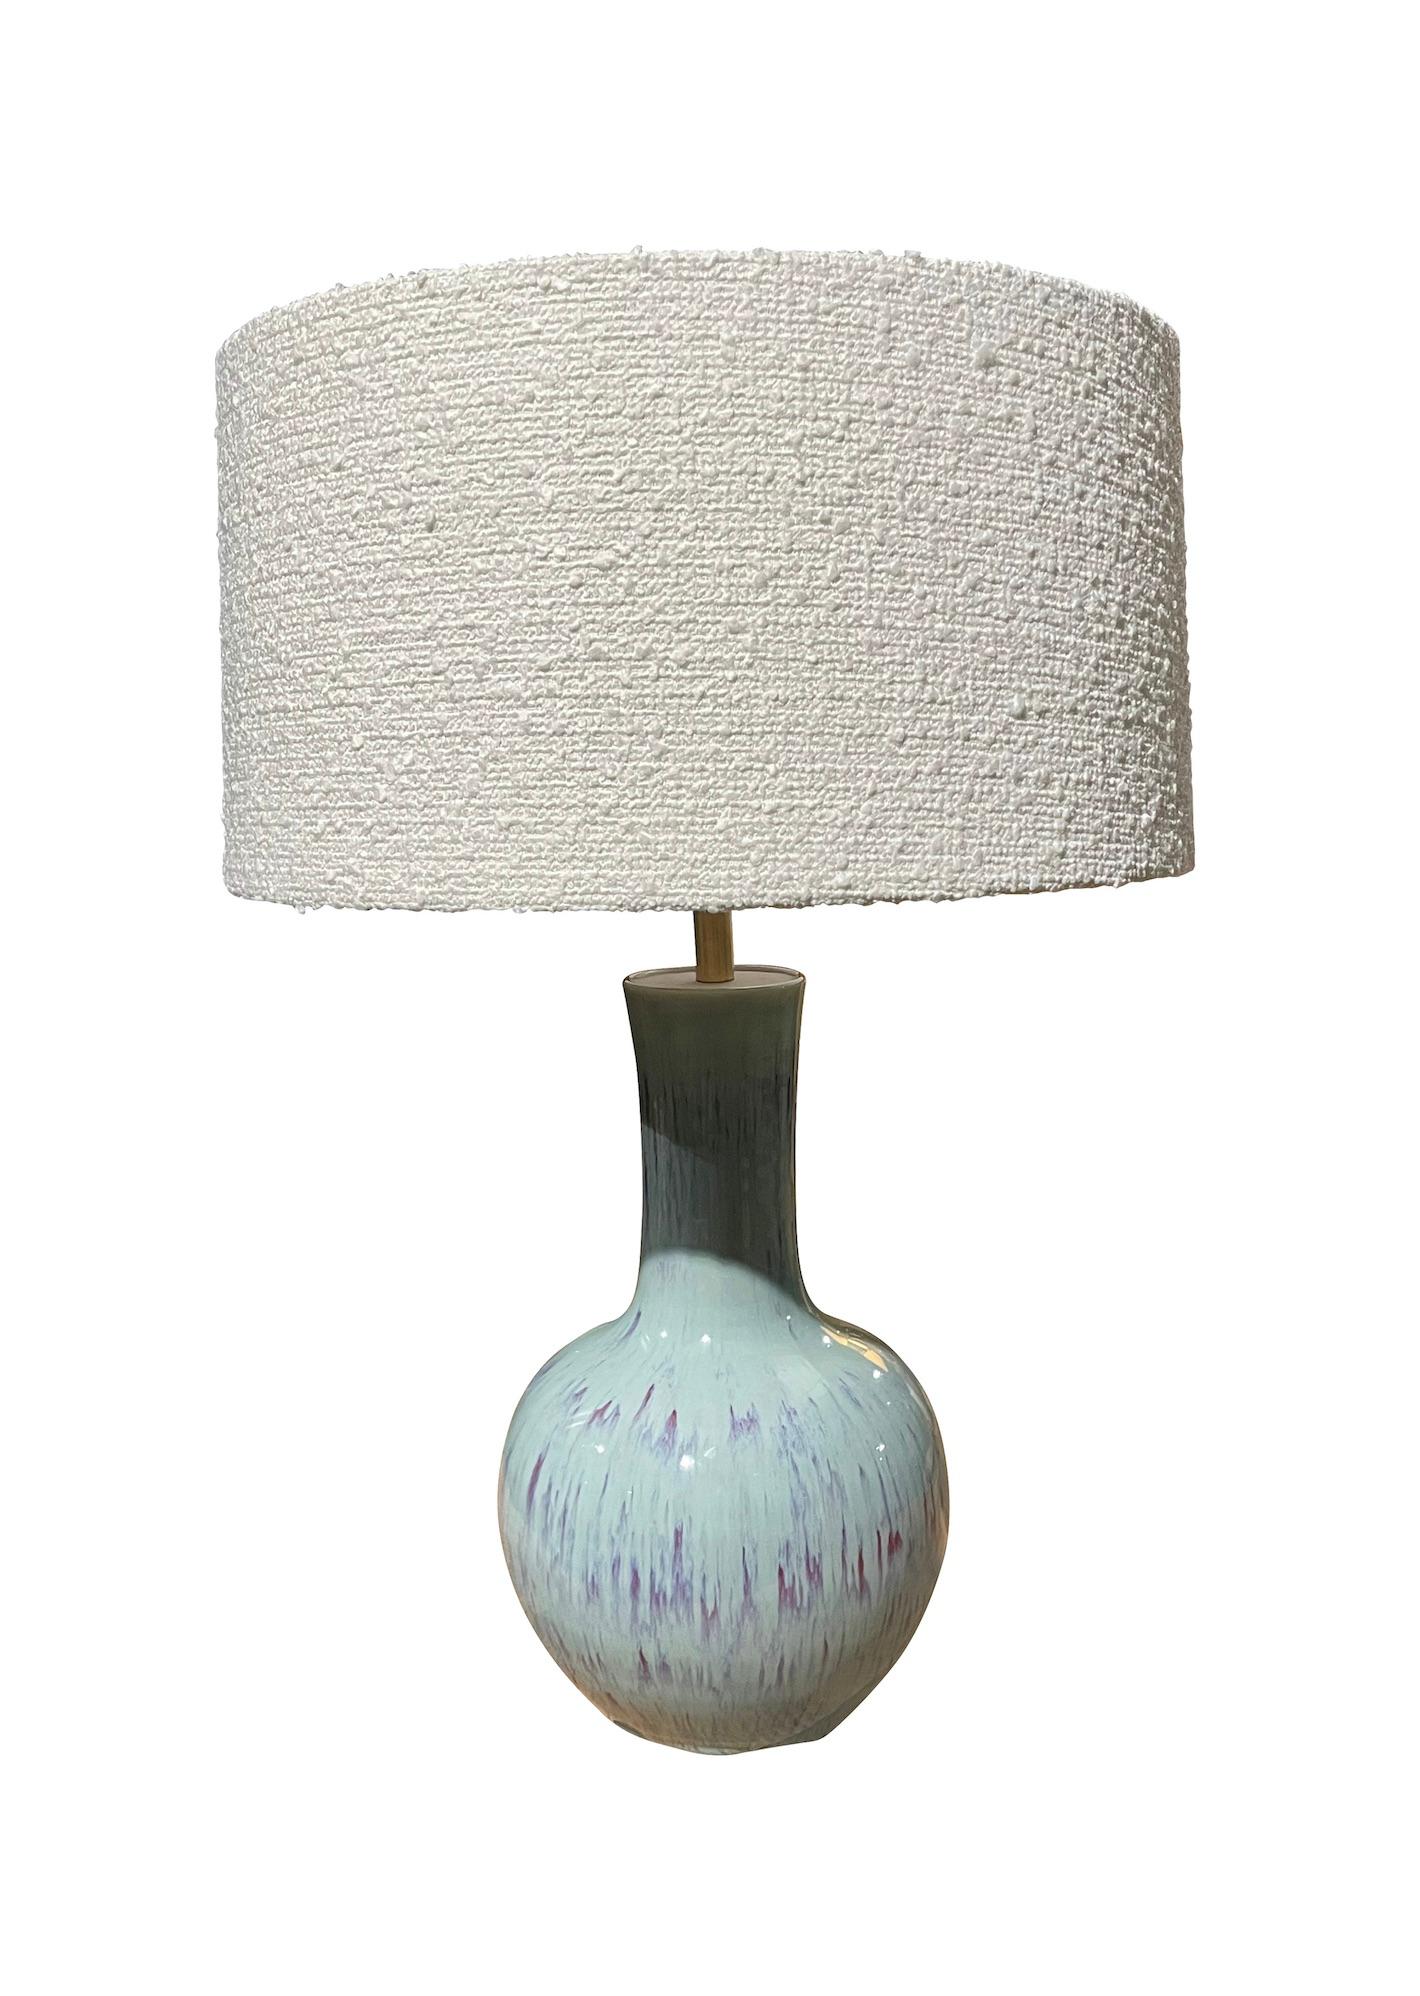 Contemporary Chinese pair of funnel neck shaped lamps.
Pale blue with decorative purple drip glaze design.
Boucle shades includes.
Base measures 8